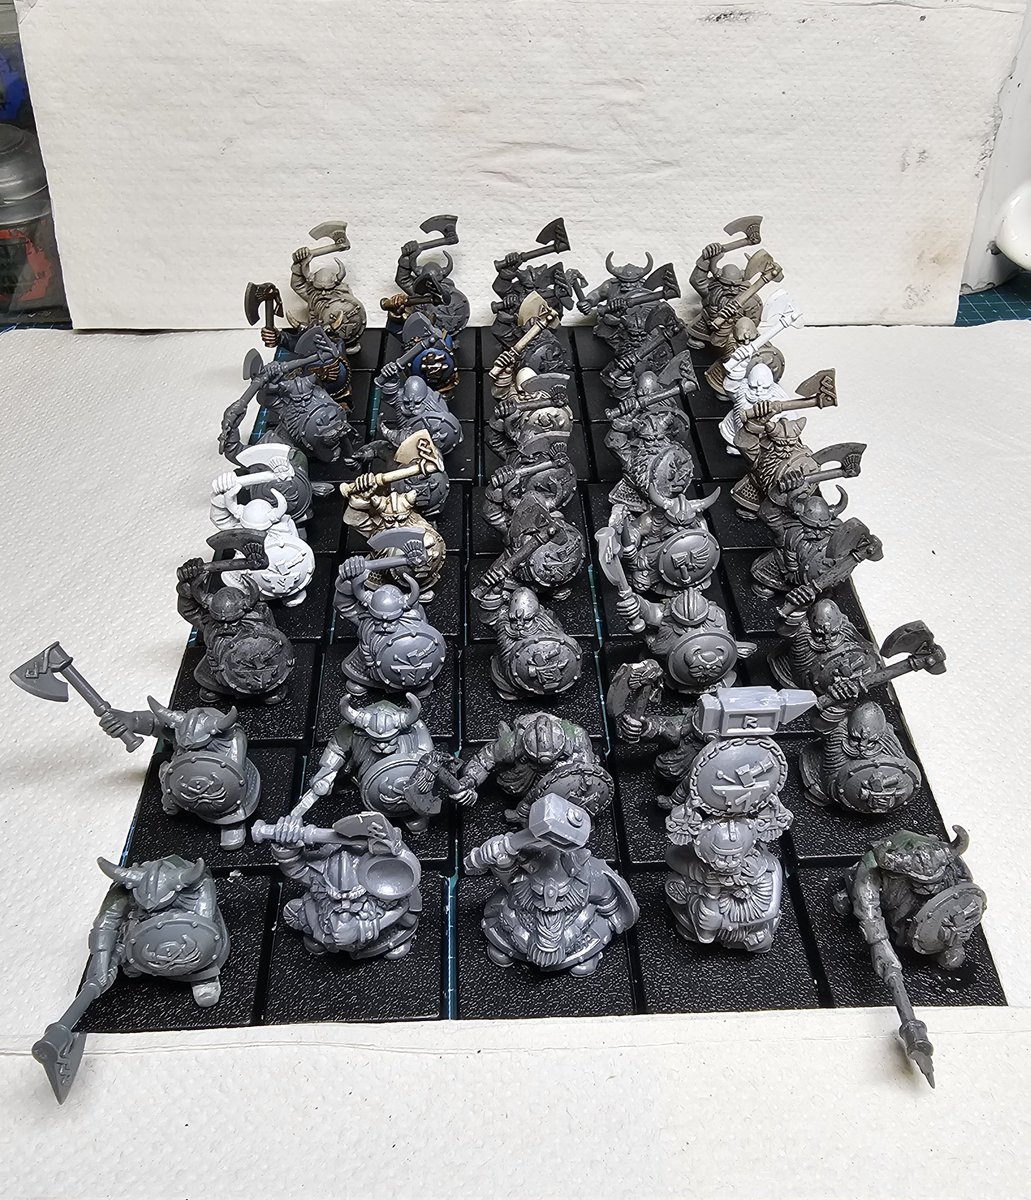 #TheStreak24 Day 14
A couple of hours well spent, and my first unit of dwarf warriors, all 40 of the little buggers, is ready for priming! It is ON! #oldhammer #warhammertheoldworld #dwarfs #wip